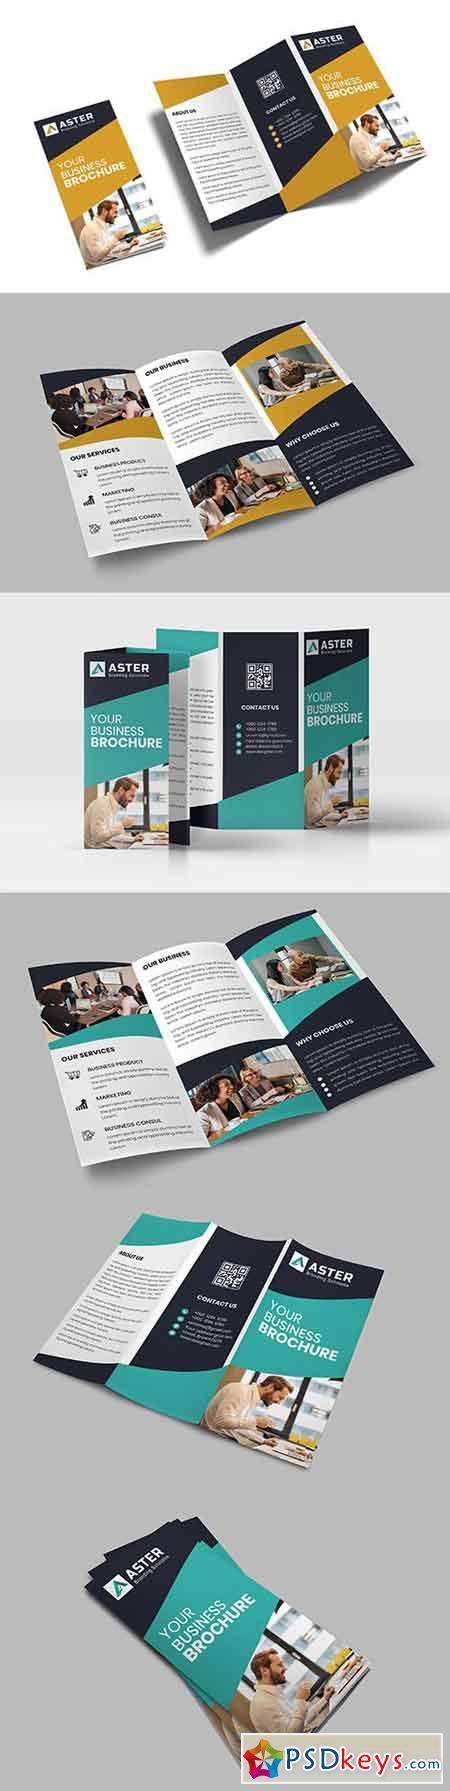 Business Trifold Brochure 2797682